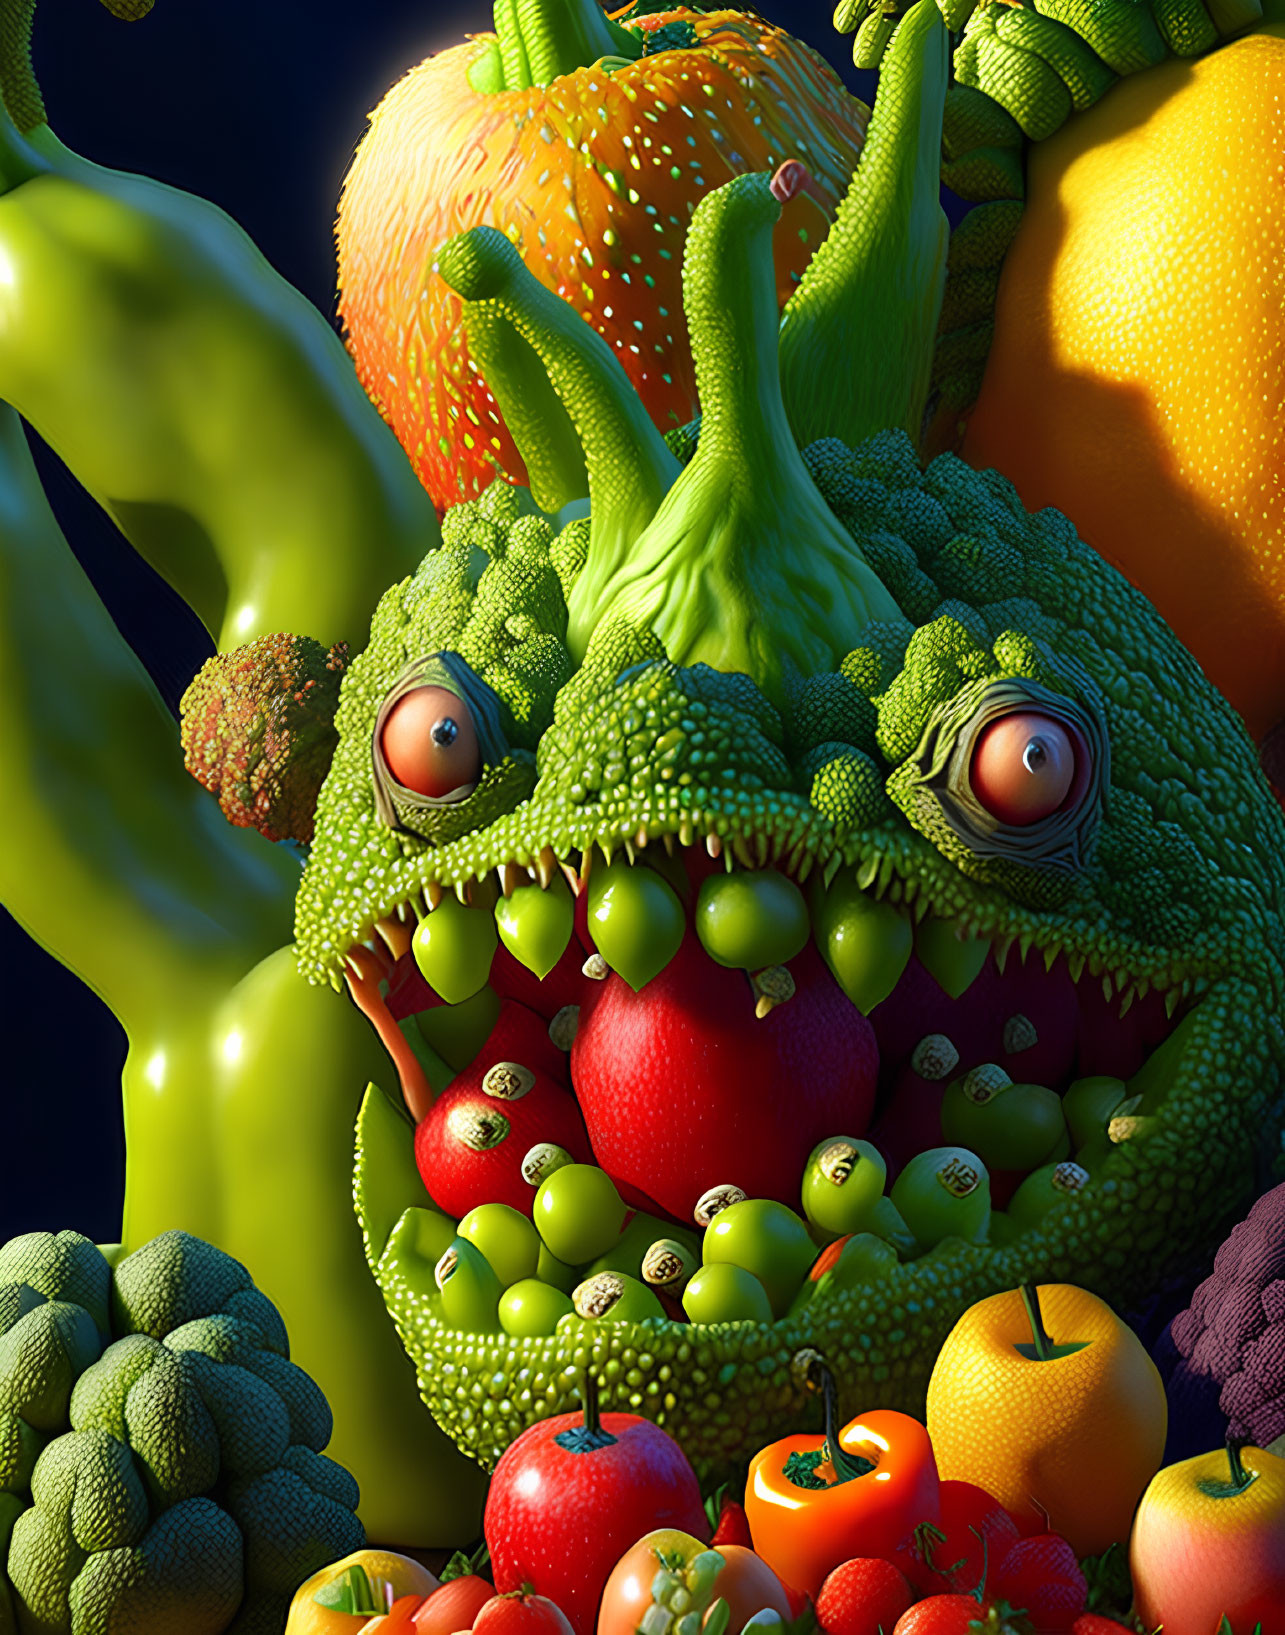 Whimsical creature made of fruits and vegetables in colorful artwork